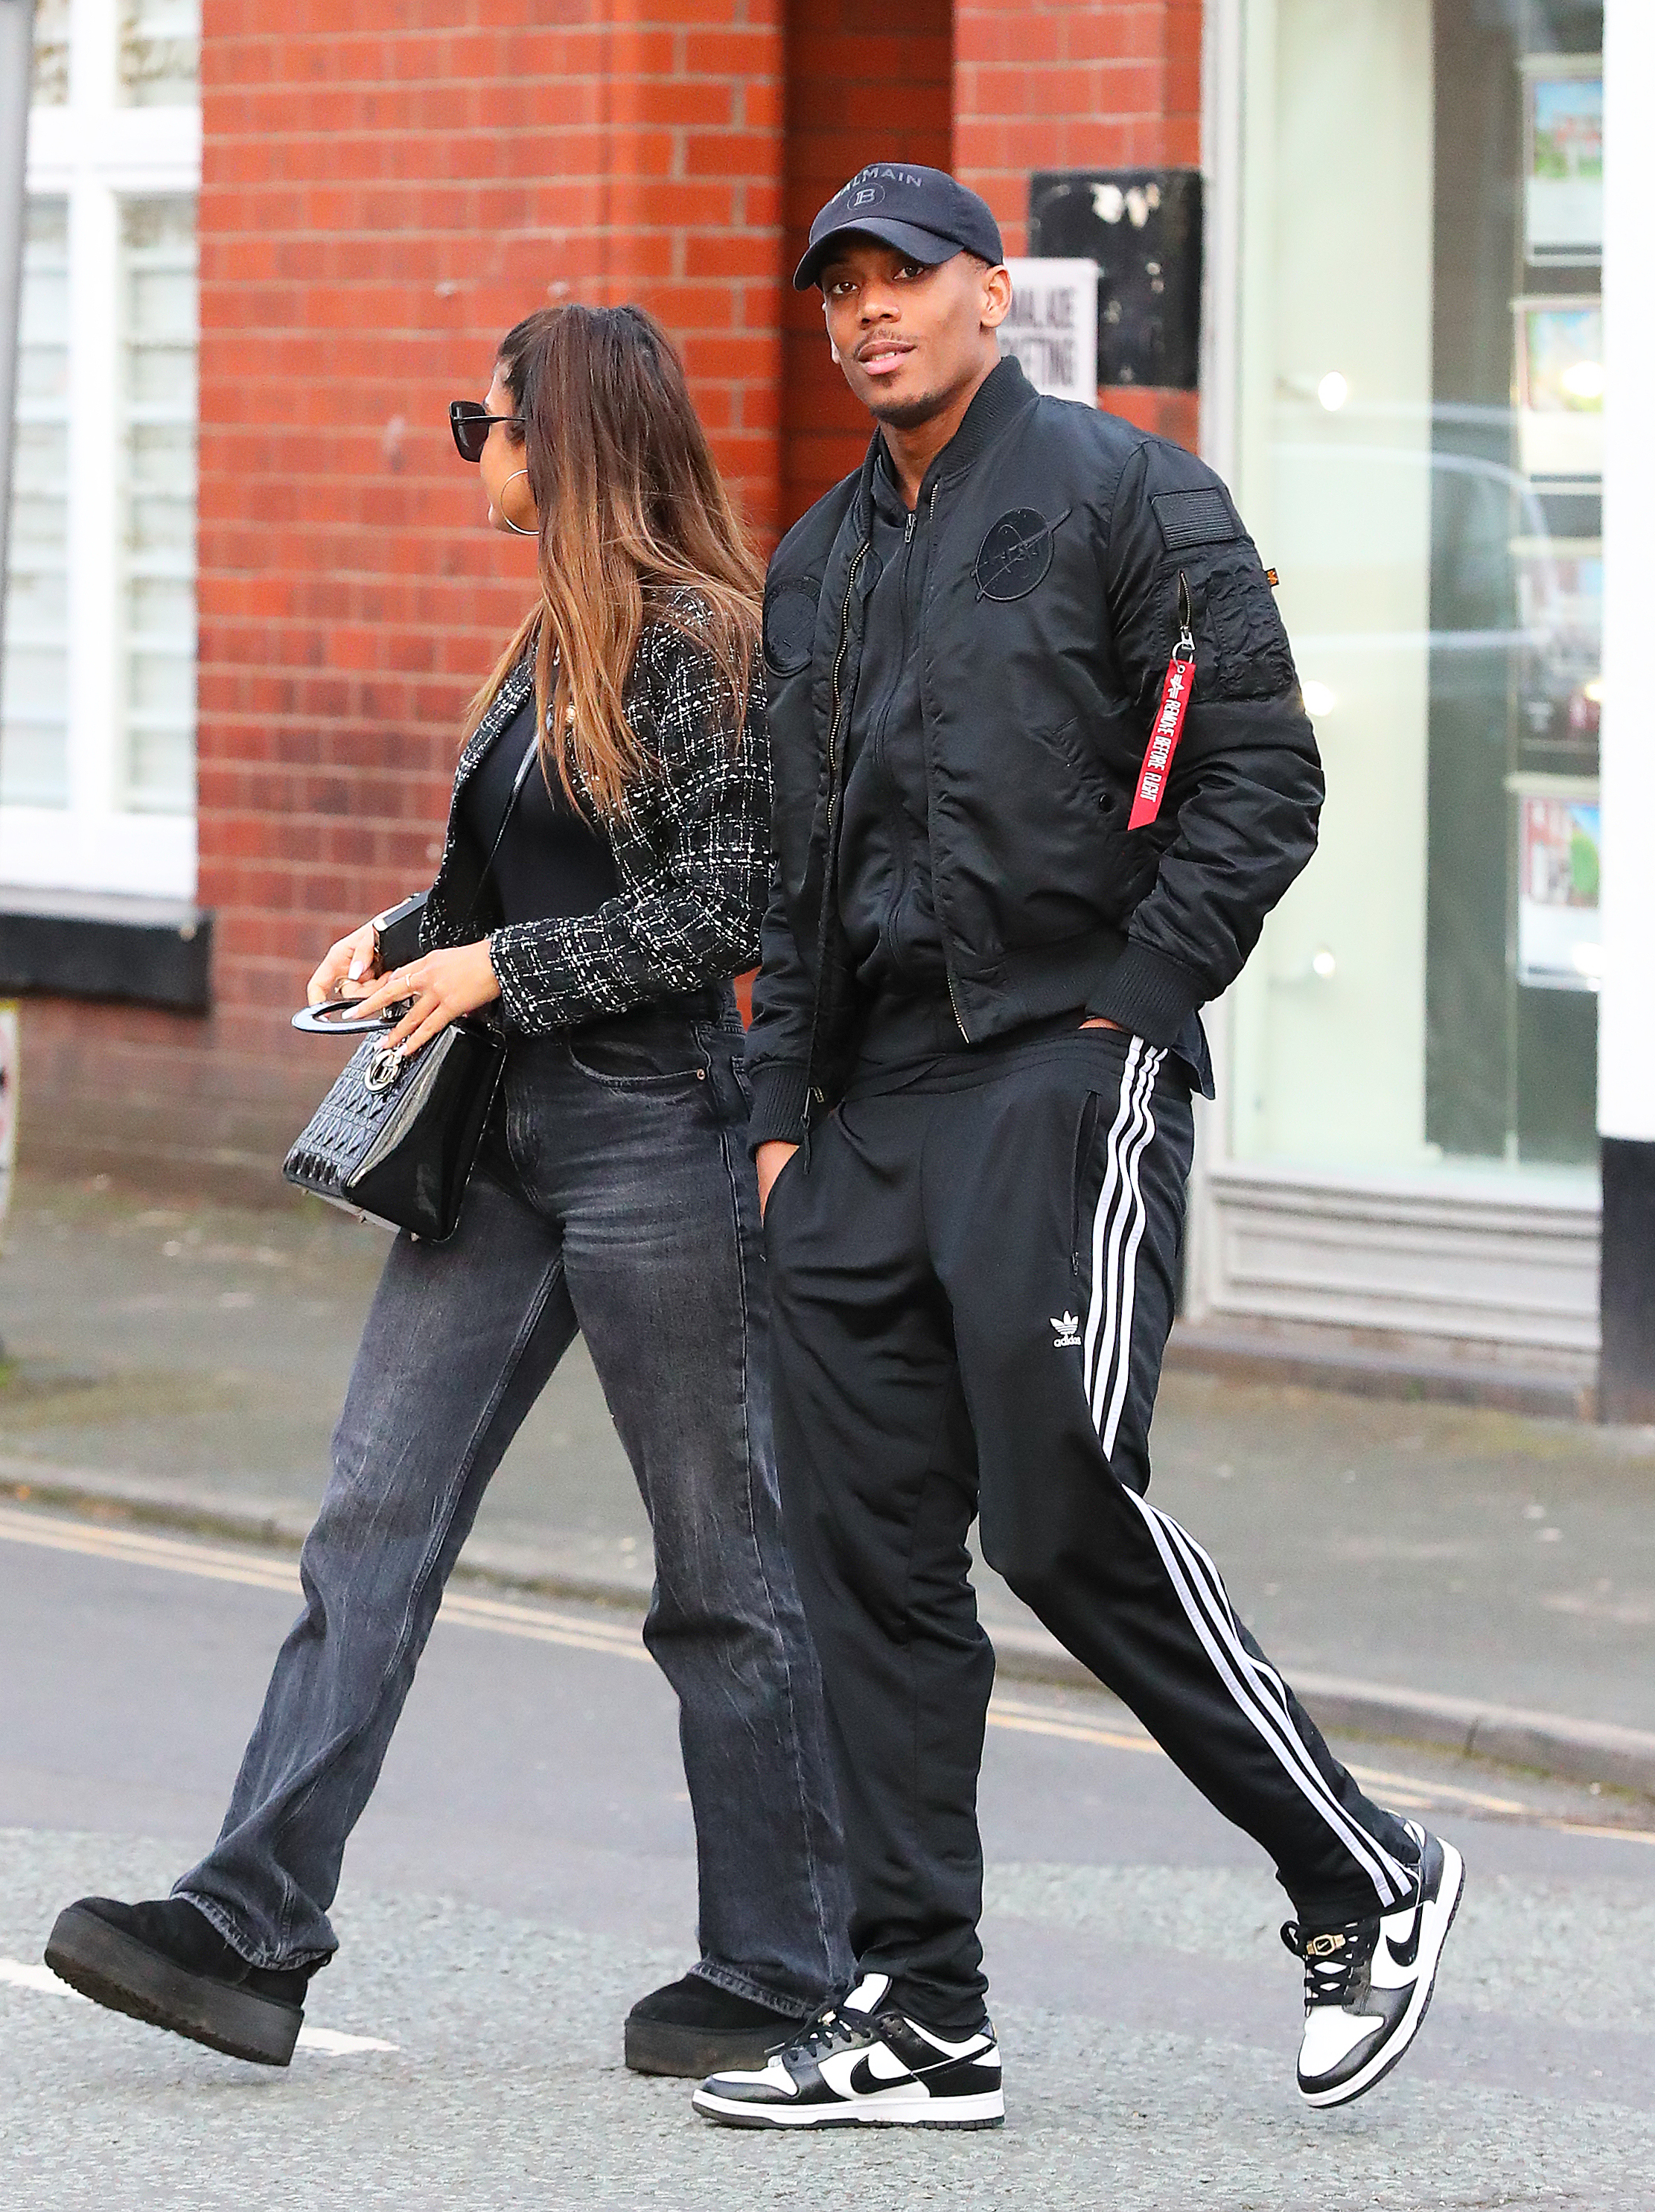 The duo went for a stroll in Hale Village